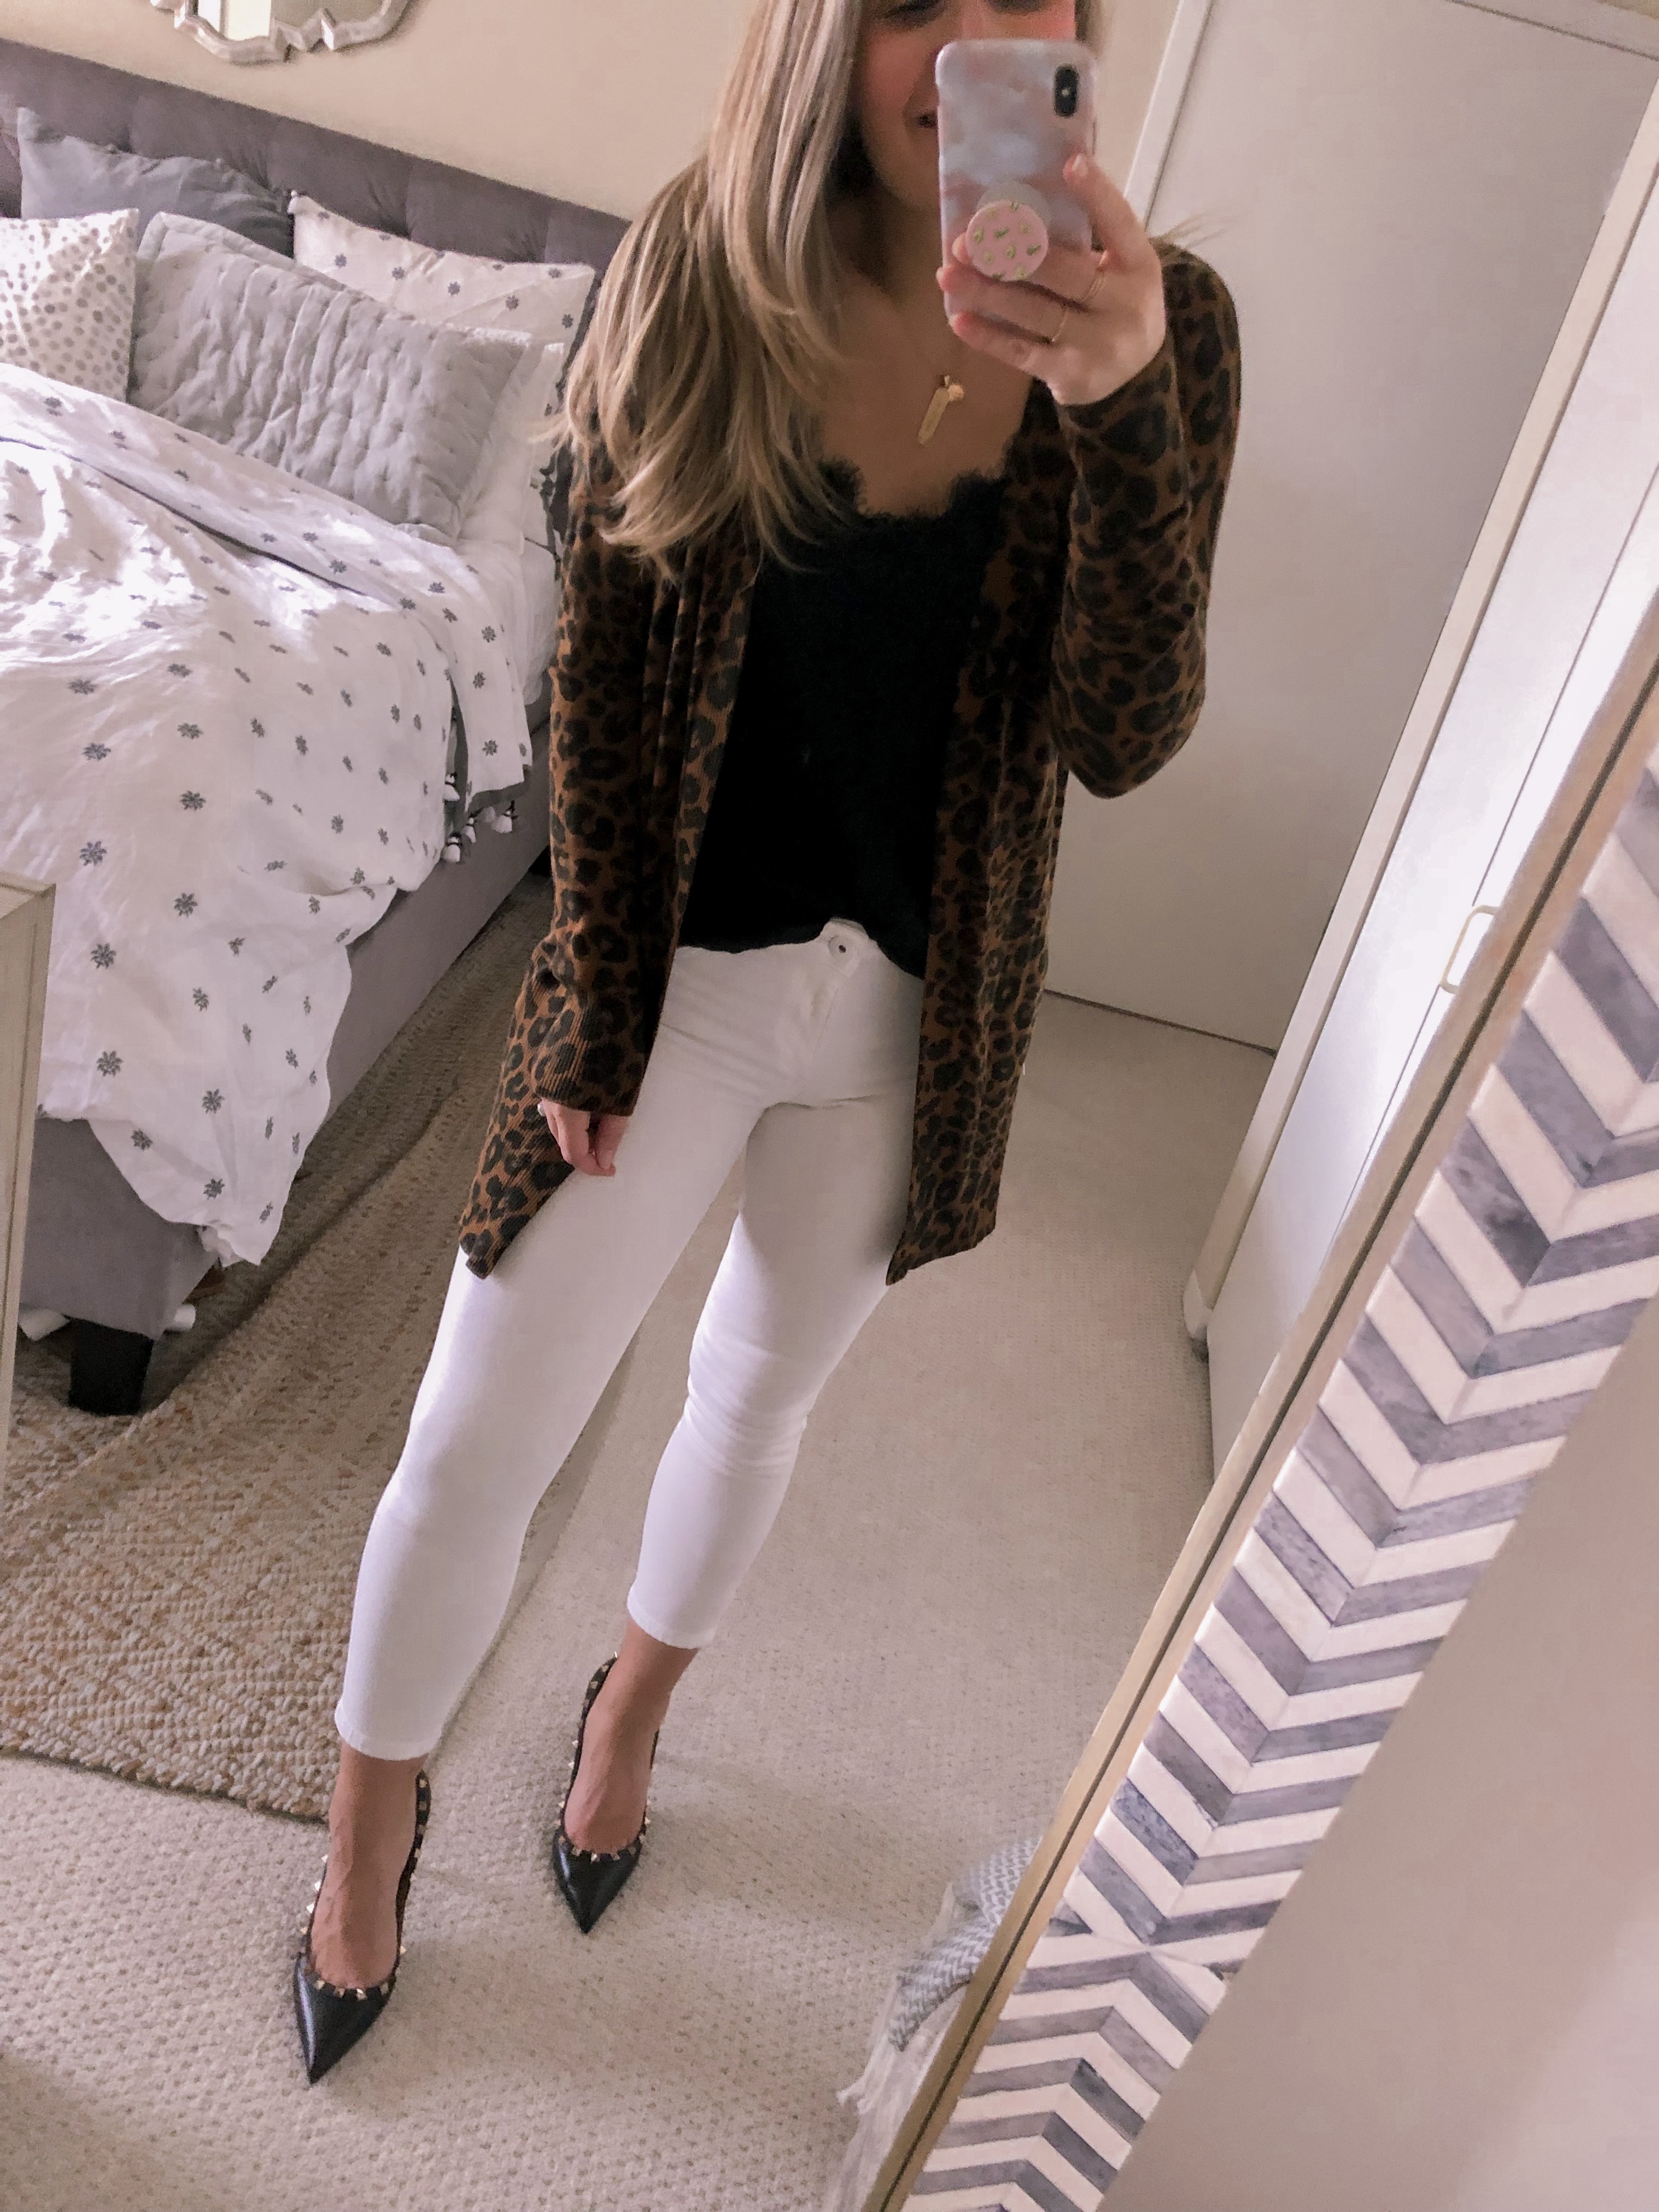 OOTD 1.14.19: Leopard Sweater and Black Lace Cami